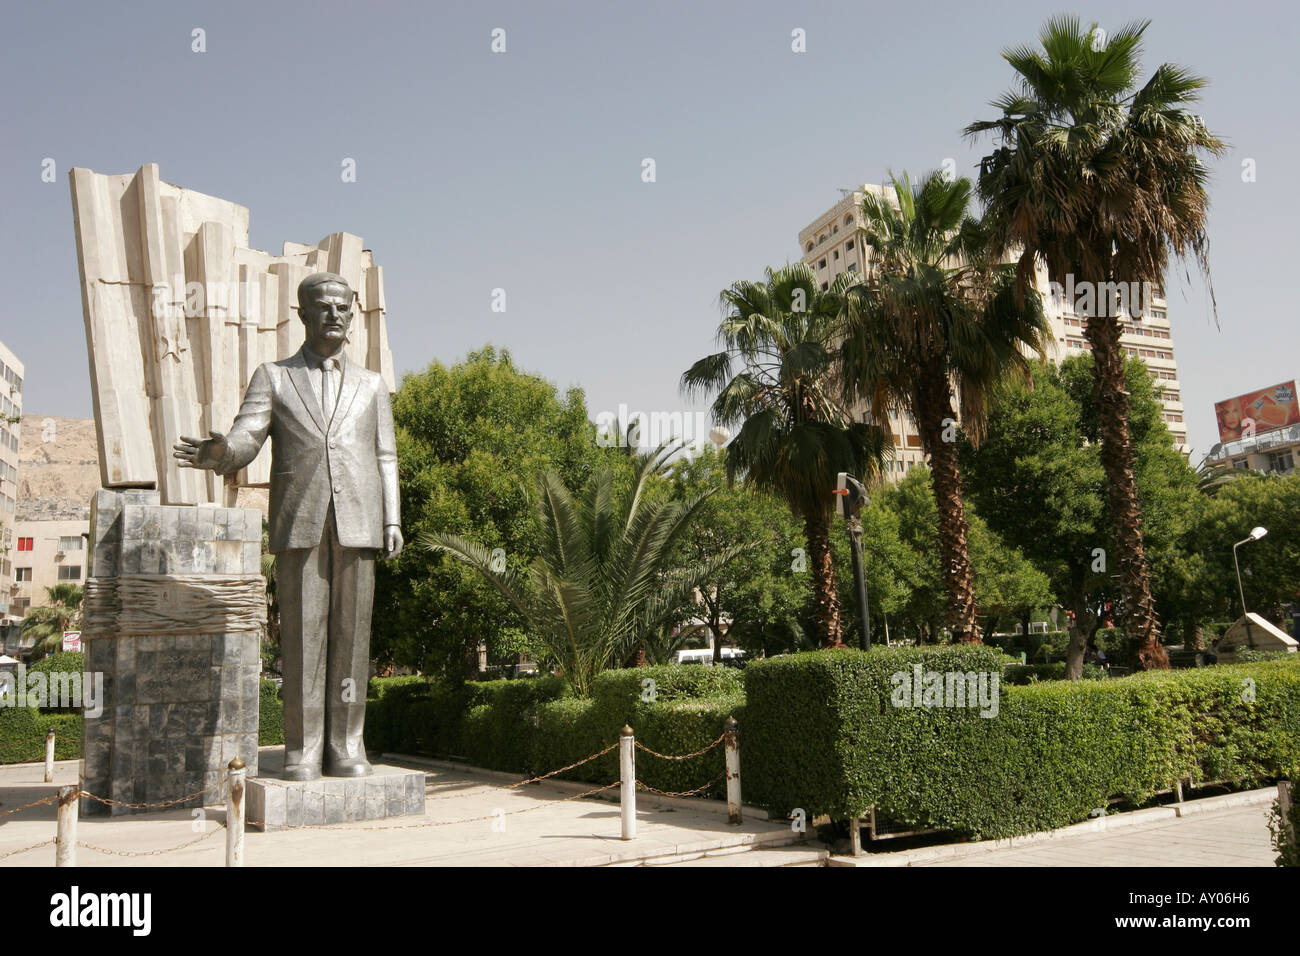 Statue of former Syrian President Hafez al-Assad, Damascus, Syria, Middle East Stock Photo